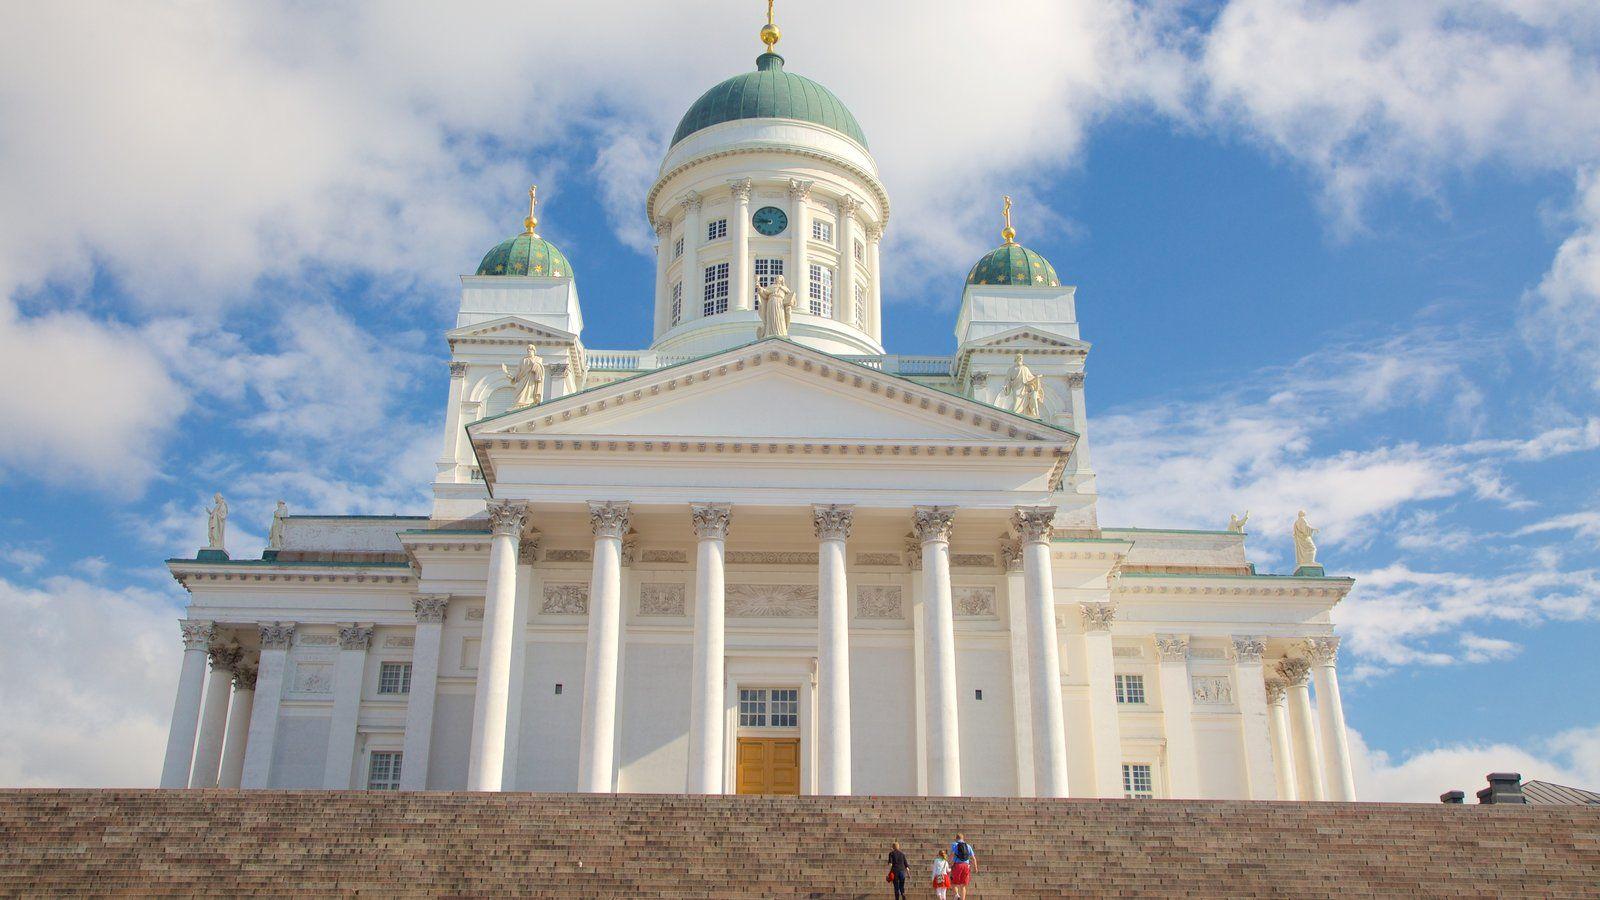 Helsinki Cathedral Pictures View Photos & Wallpaper of Helsinki Cathedral